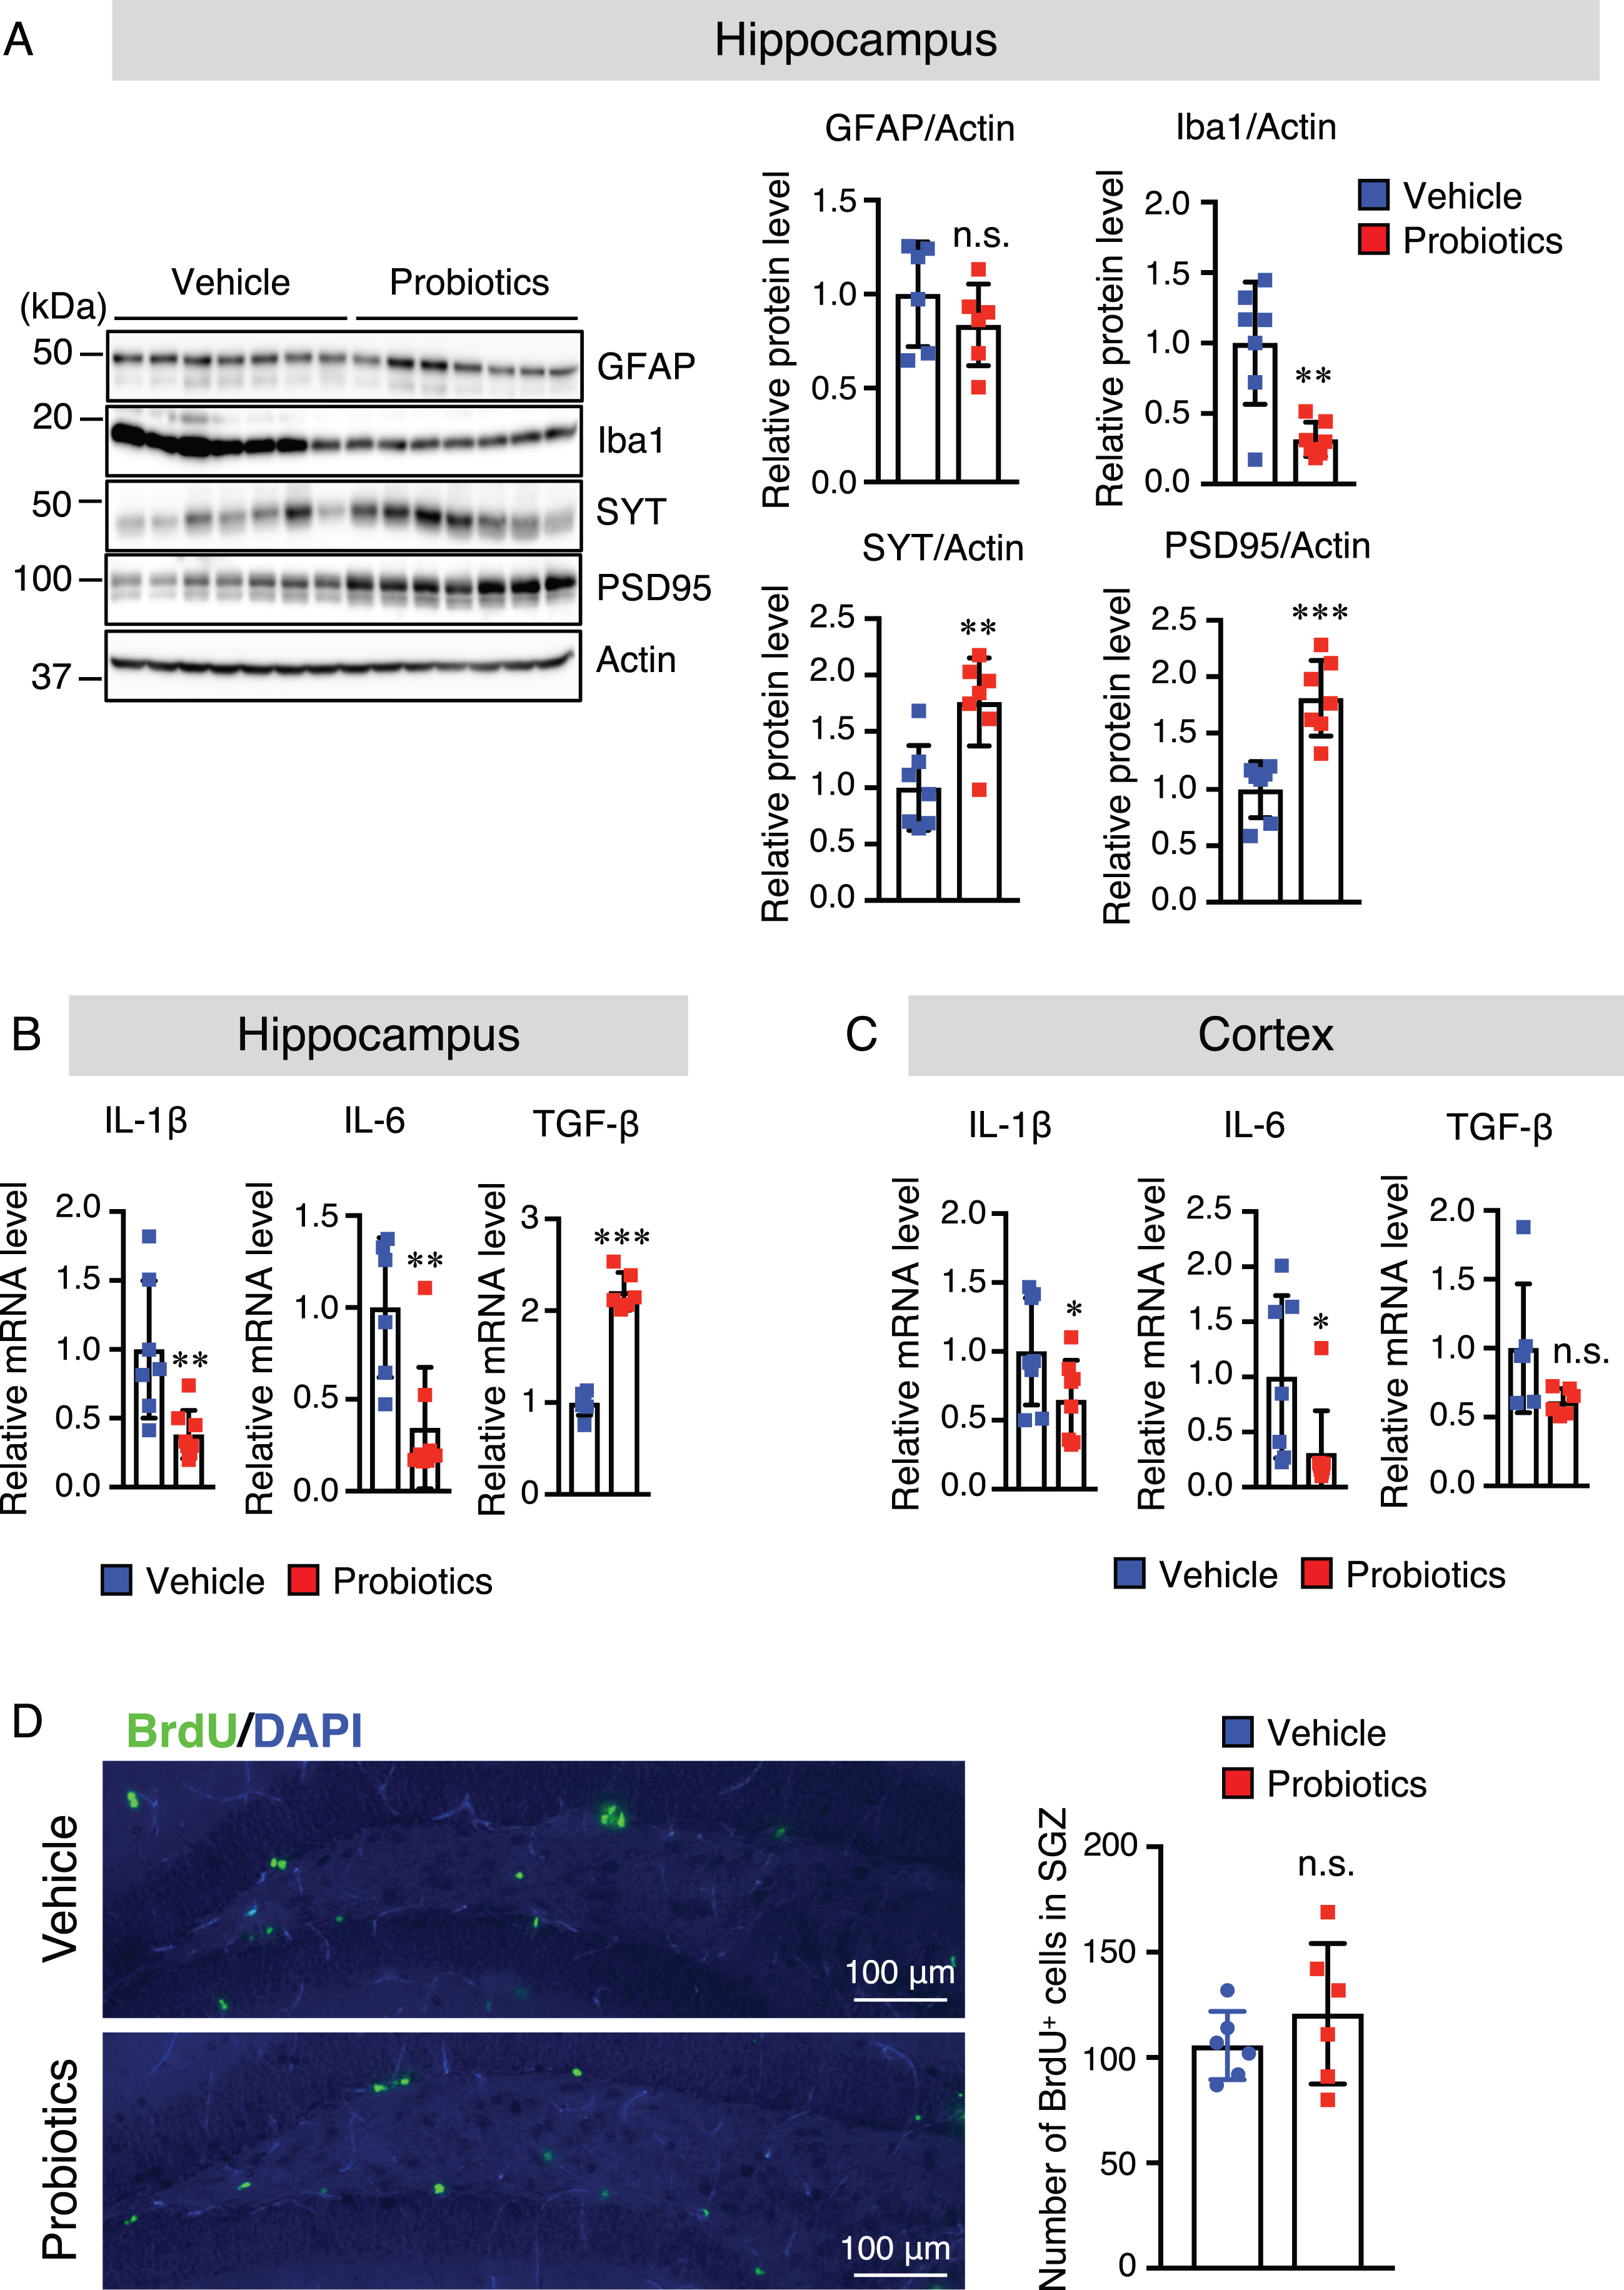 B. breve MCC1274 supplementation decreases the Iba1 protein level and increases synaptic protein levels in the hippocampus, whereas it has no effect on cell proliferation in the DG of the hippocampus. A) Protein levels of GFAP, Iba1, SYT, PSD95, and actin in the hippocampus were determined by western blot analysis and quantified by densitometry, normalized to actin level, and expressed as a value relative to the control. IL-6 and IL-1β, and TFG-β1 mRNA expression levels in the hippocampus (B) and cortex (C) were assessed by qRT-PCR analysis. Each mRNA expression was normalized to the corresponding amount of GAPDH mRNA. D) Brain sections were stained with the anti-BrdU antibody (green) and cell nuclei were stained with DAPI (blue) in DG in the hippocampus (left panel). The number of BrdU+ cells in the SGZ of DG (right panel). Data are expressed as the mean±SD, n = 6-7, *p < 0.05, **p < 0.01, ***p < 0.001 compared with the vehicle group n.s., no significant difference as determined by Student’s t-test.